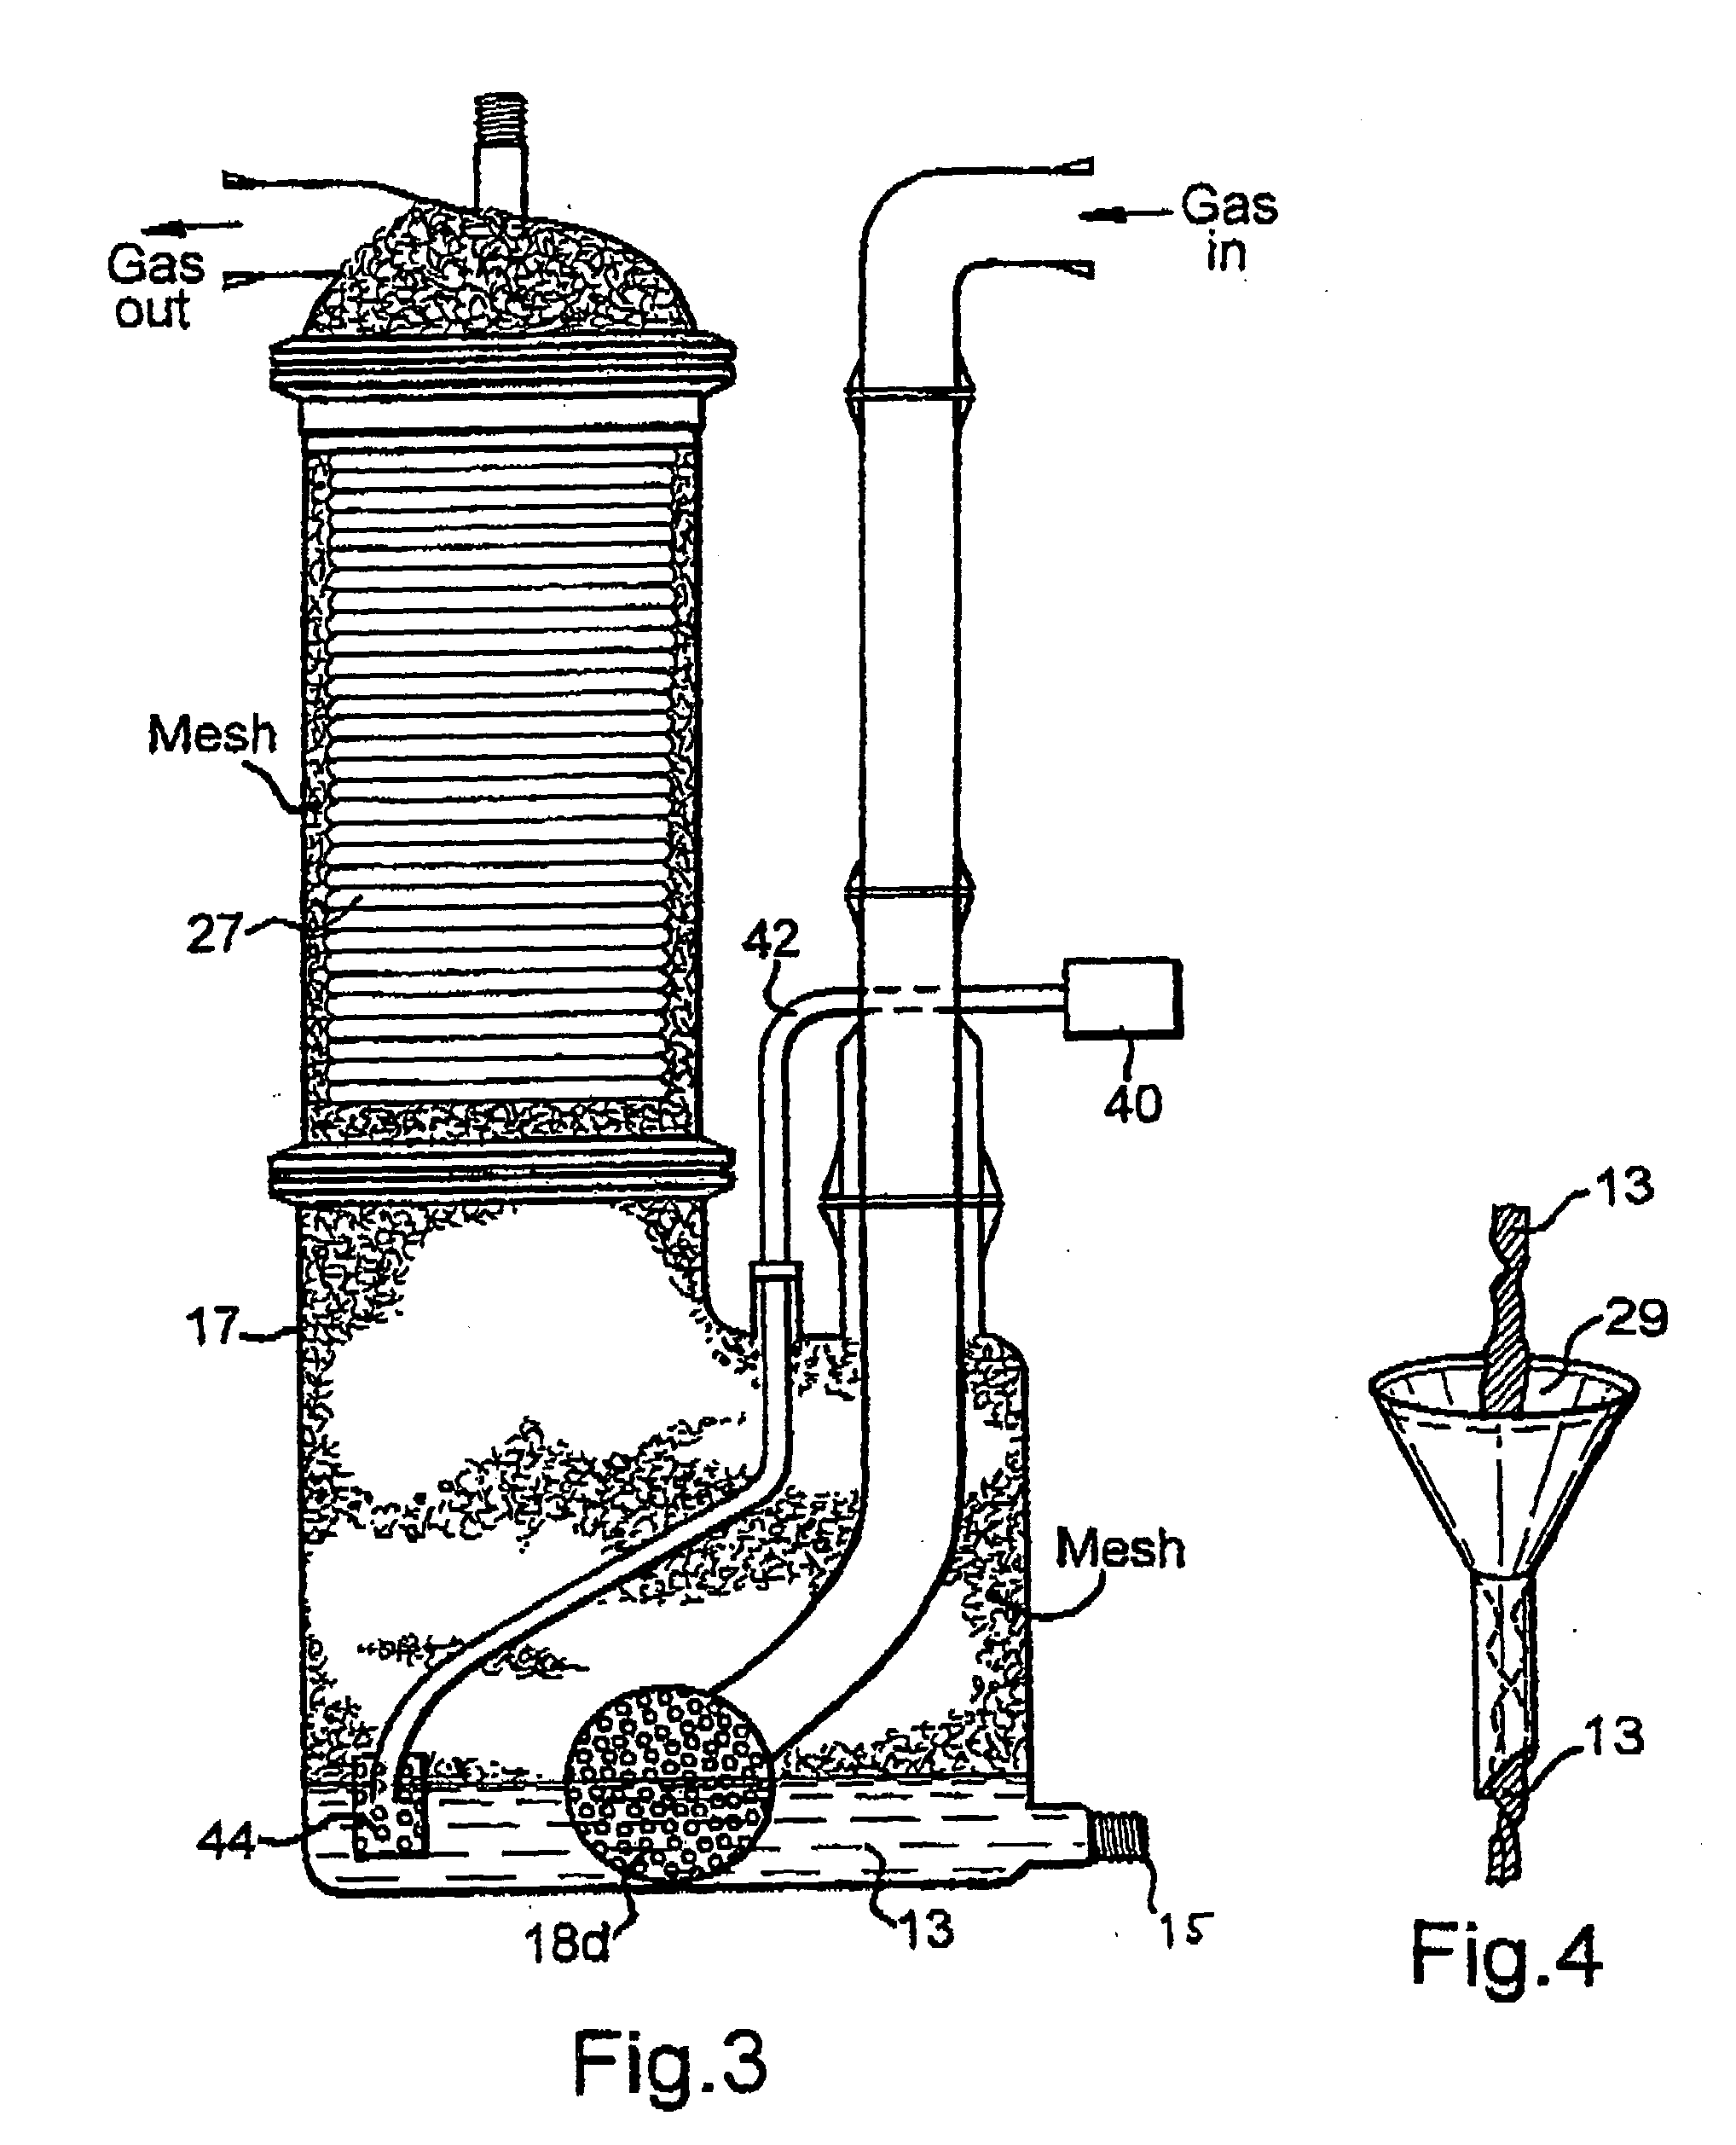 Method and apparatus for removing sulfur components